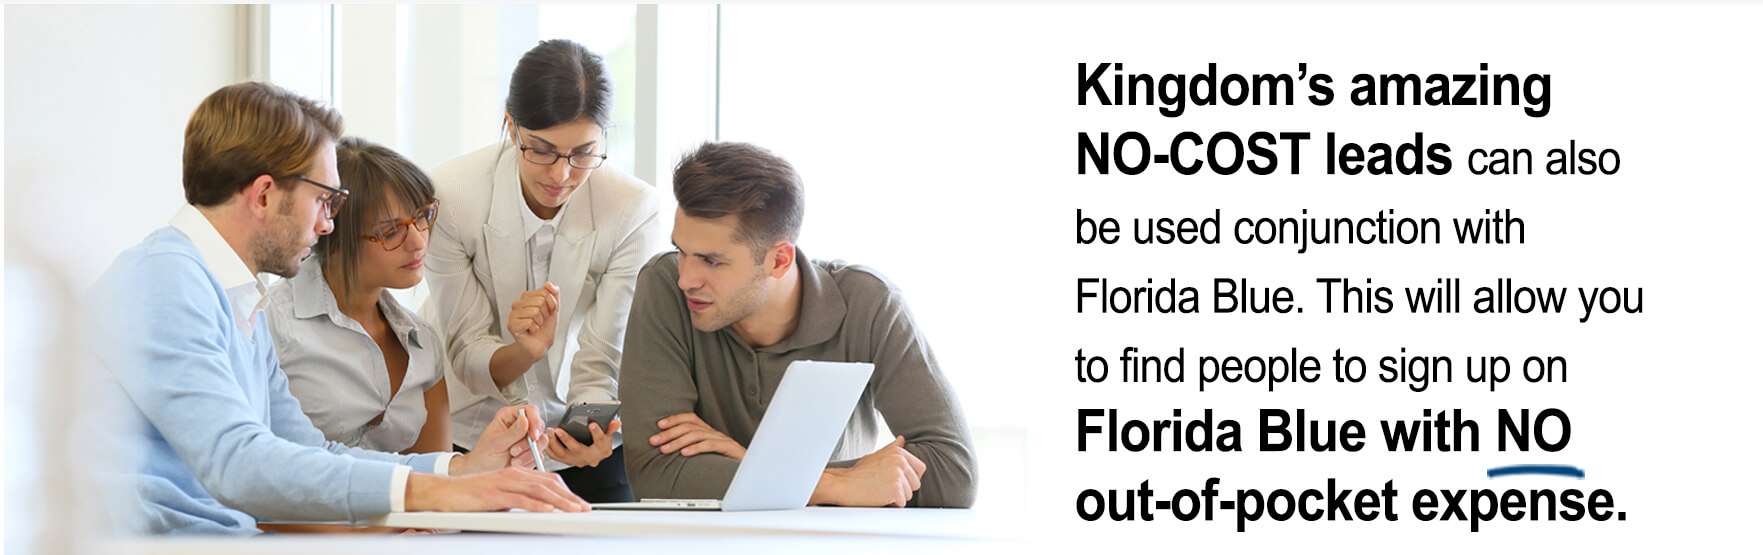 Kingdom’s amazing no-cost leads can also be used in conjunction with Florida Blue. This will allow you to find people to sign up on Florida Blue with no out of pocket expense.